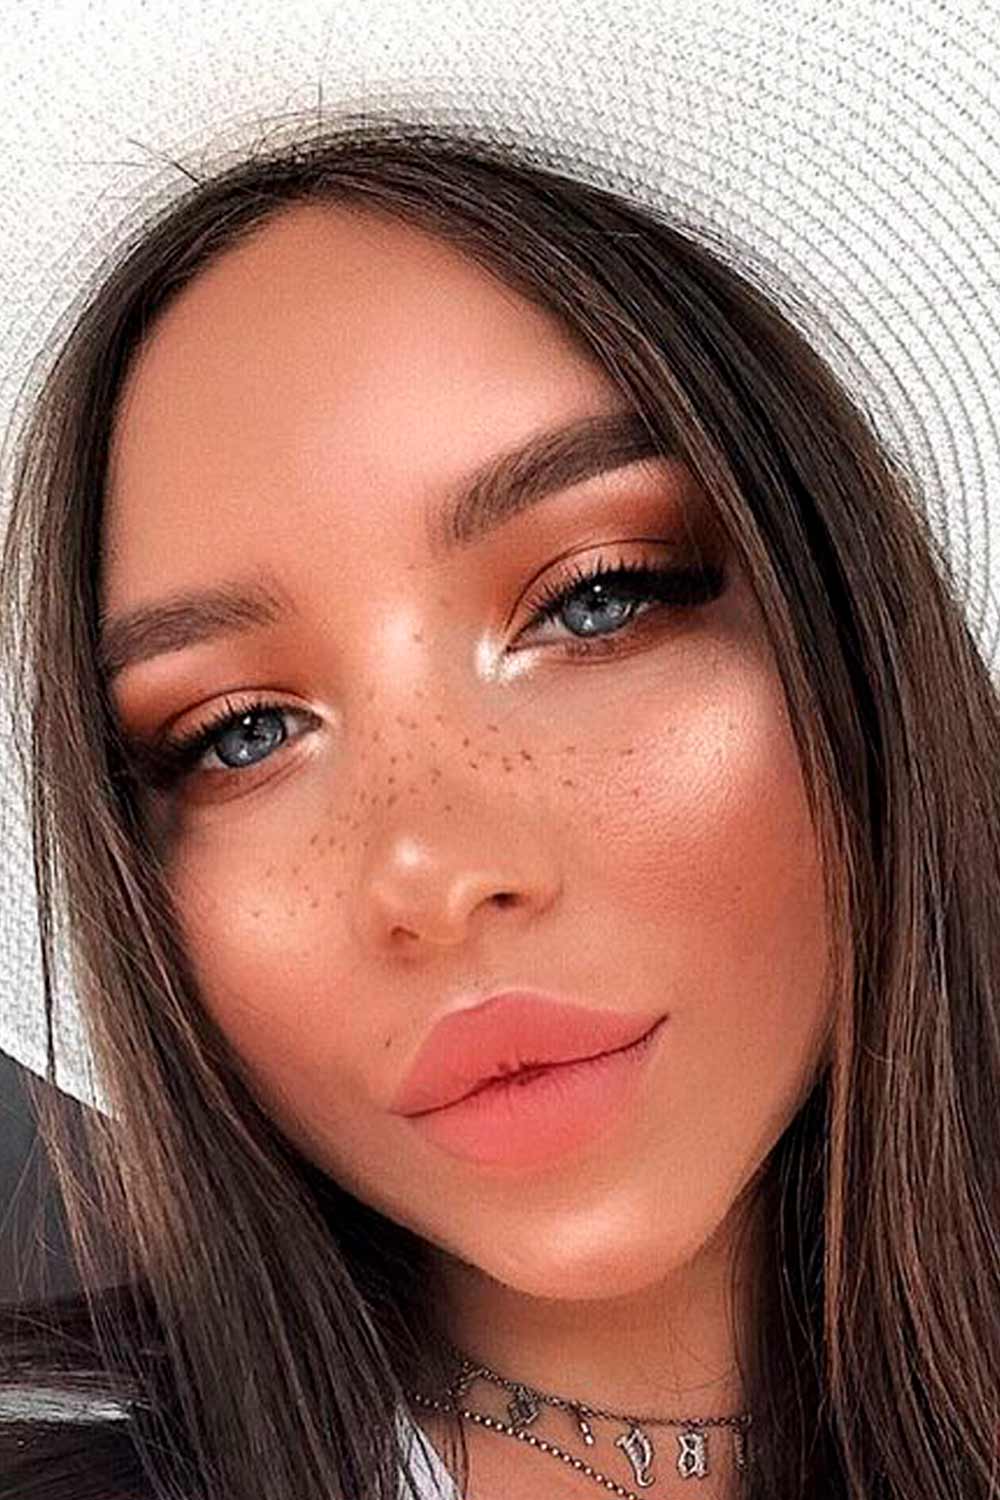 What Do I Need For A Natural Makeup Look?